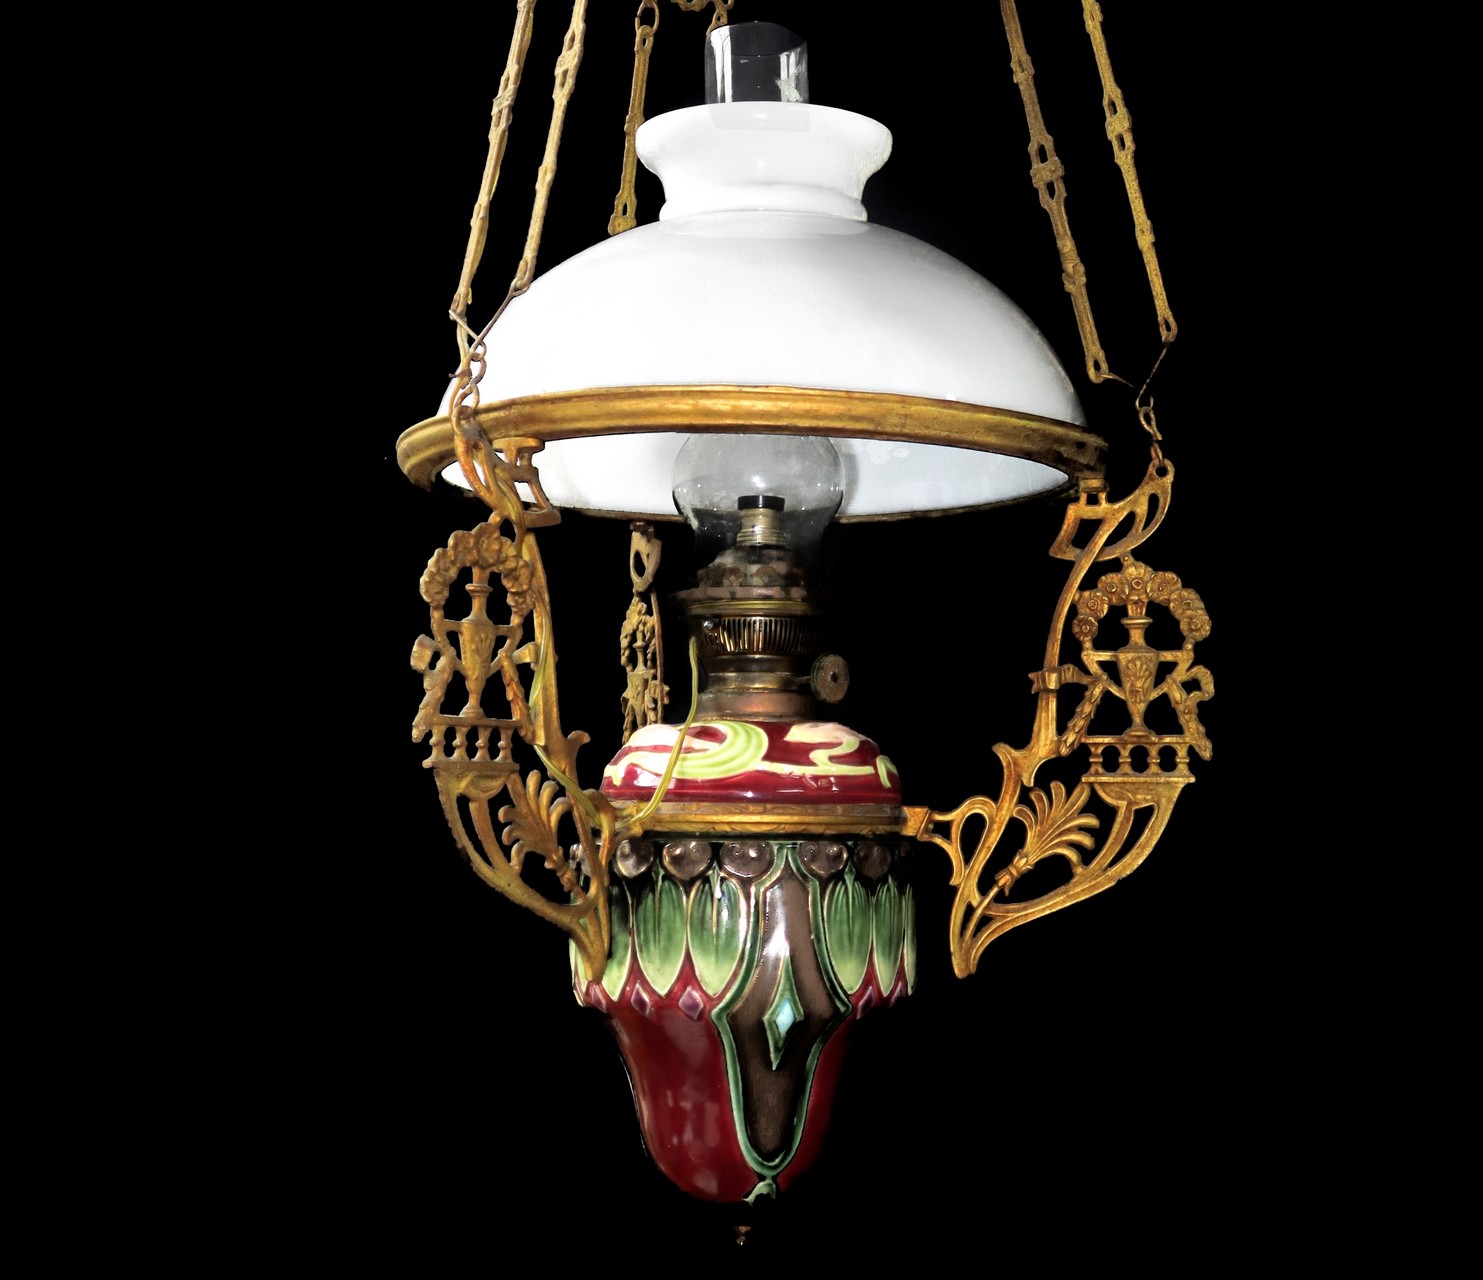 Pendant oil chandelier, Early 20th century - Image 2 of 4